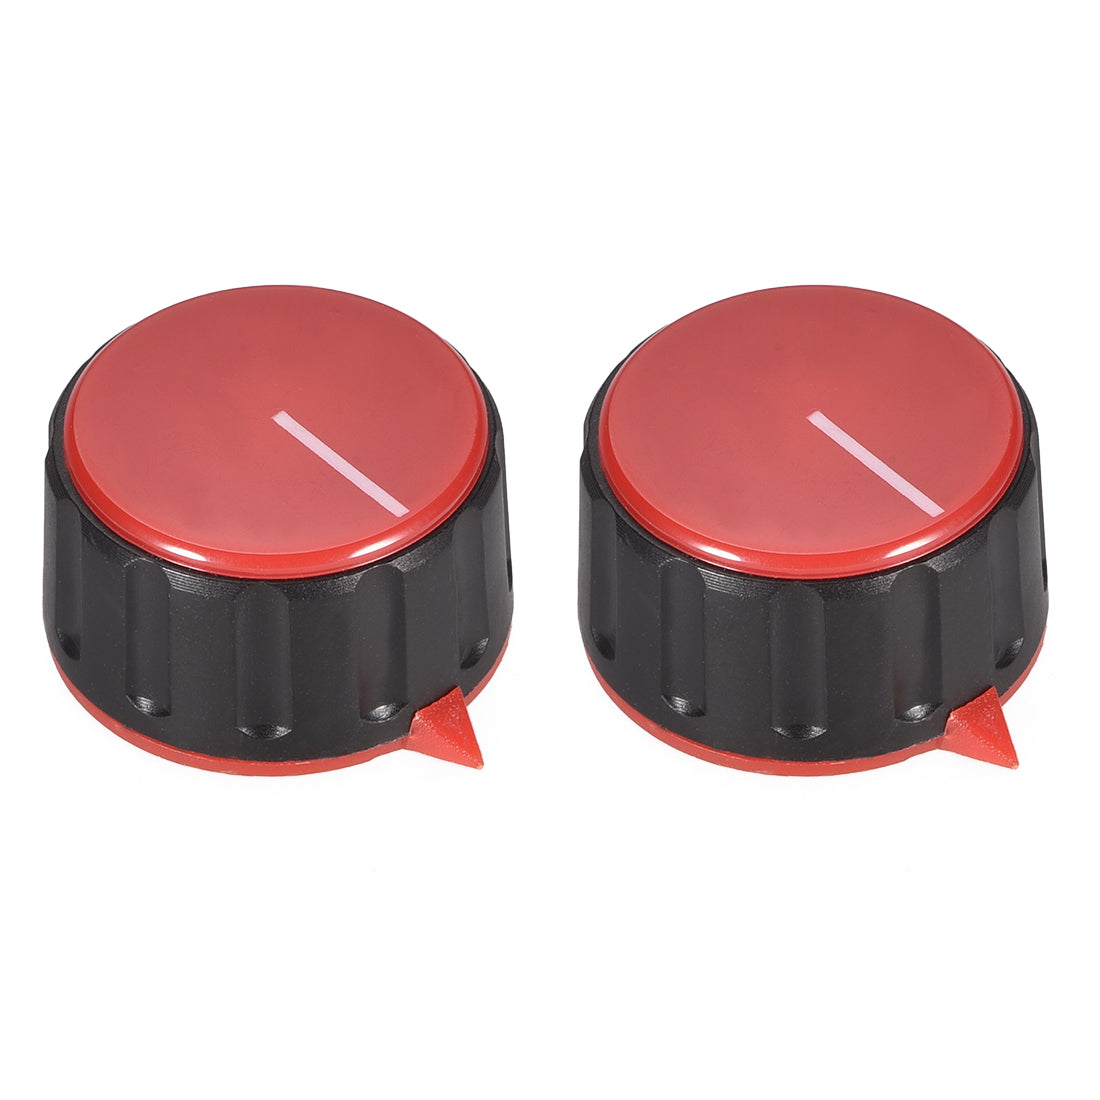 uxcell Uxcell 2pcs 6mm Potentiometer Control Knobs For Electric Guitar Acrylic Volume Tone Knobs Red